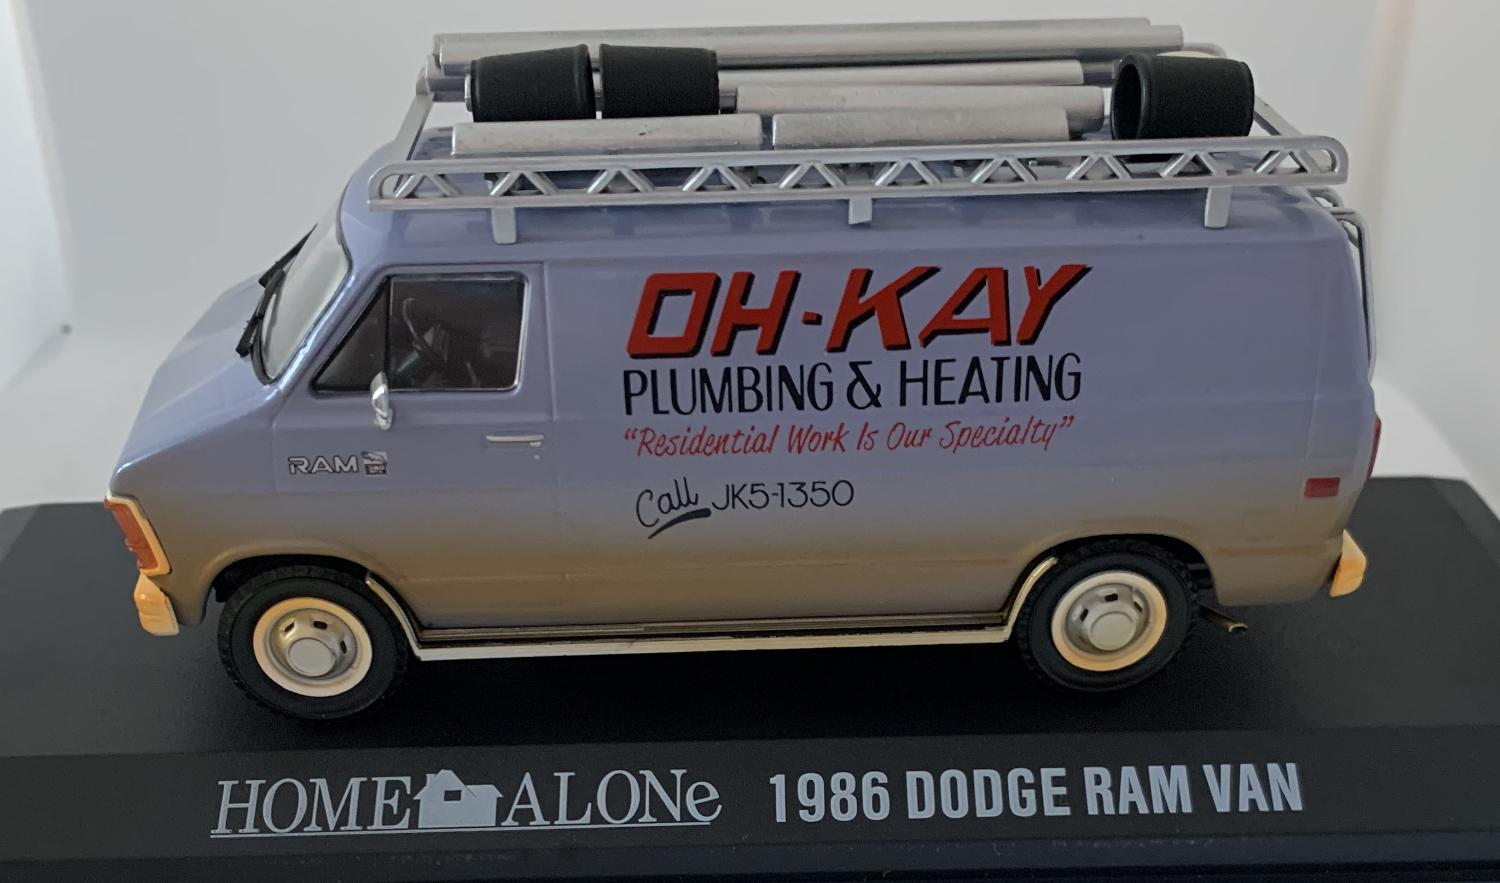 Home Alone Dodge Ram Van 1986 Oh-Kay Plumbing and Heating Van, 1:43 scale model from Greenlight, Limited Edition